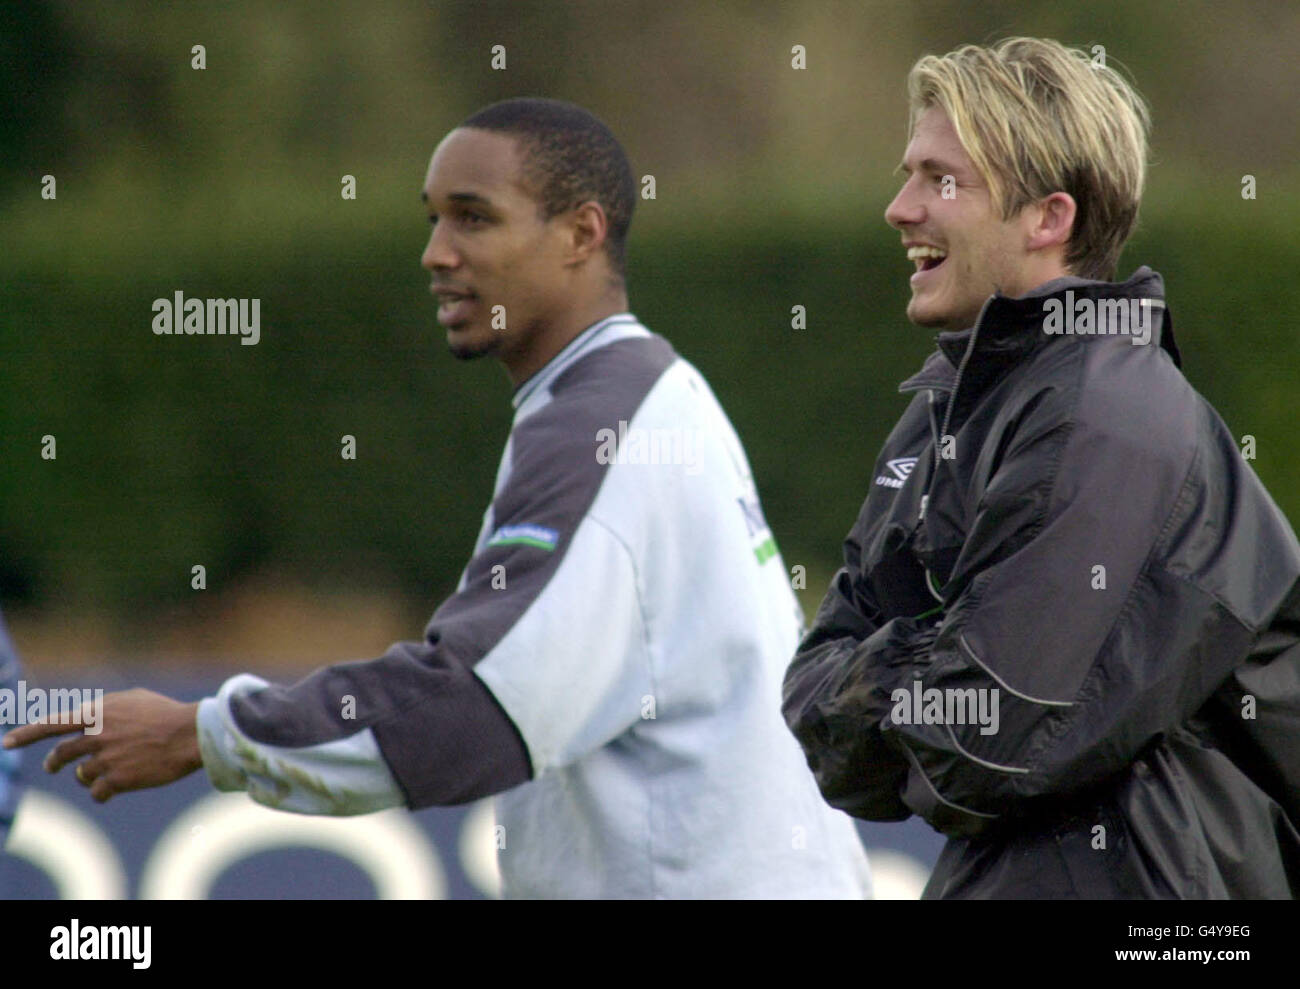 Manchester United's David Beckham (R) and Middlesbrough's Paul Ince during training with the England squad at Bisham Abbey, Berkshire, prior to their match against Argentina. * Beckham's son Brooklyn is recovering after the sickness scare which culminated in the midfielder's omission from Manchester United's FA Premiership football match with Leeds United on 20/02/2000. Beckham missed a training session on 18/02/2000 after spending the night looking after his young son and was left out of the side after a row with Sir Alex Ferguson. Stock Photo